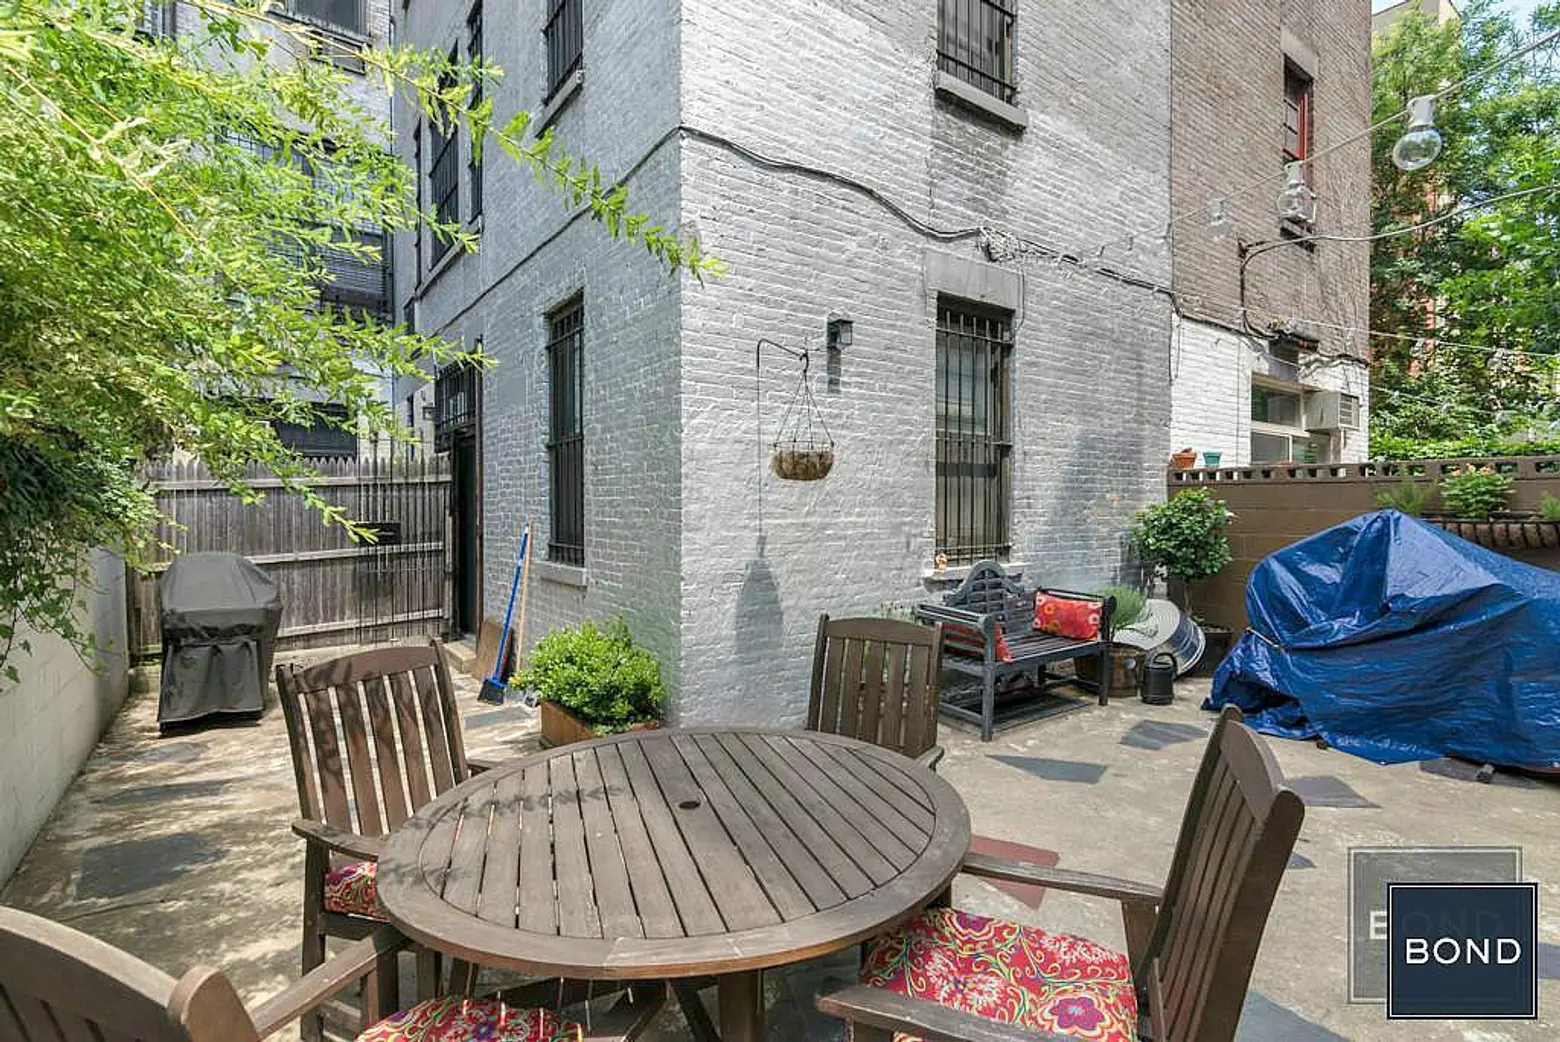 46 West 85th Street, Cool Listings, Duplex, Brownstone, Upper West Side, Manhattan, Upper West Side Apartment for rent